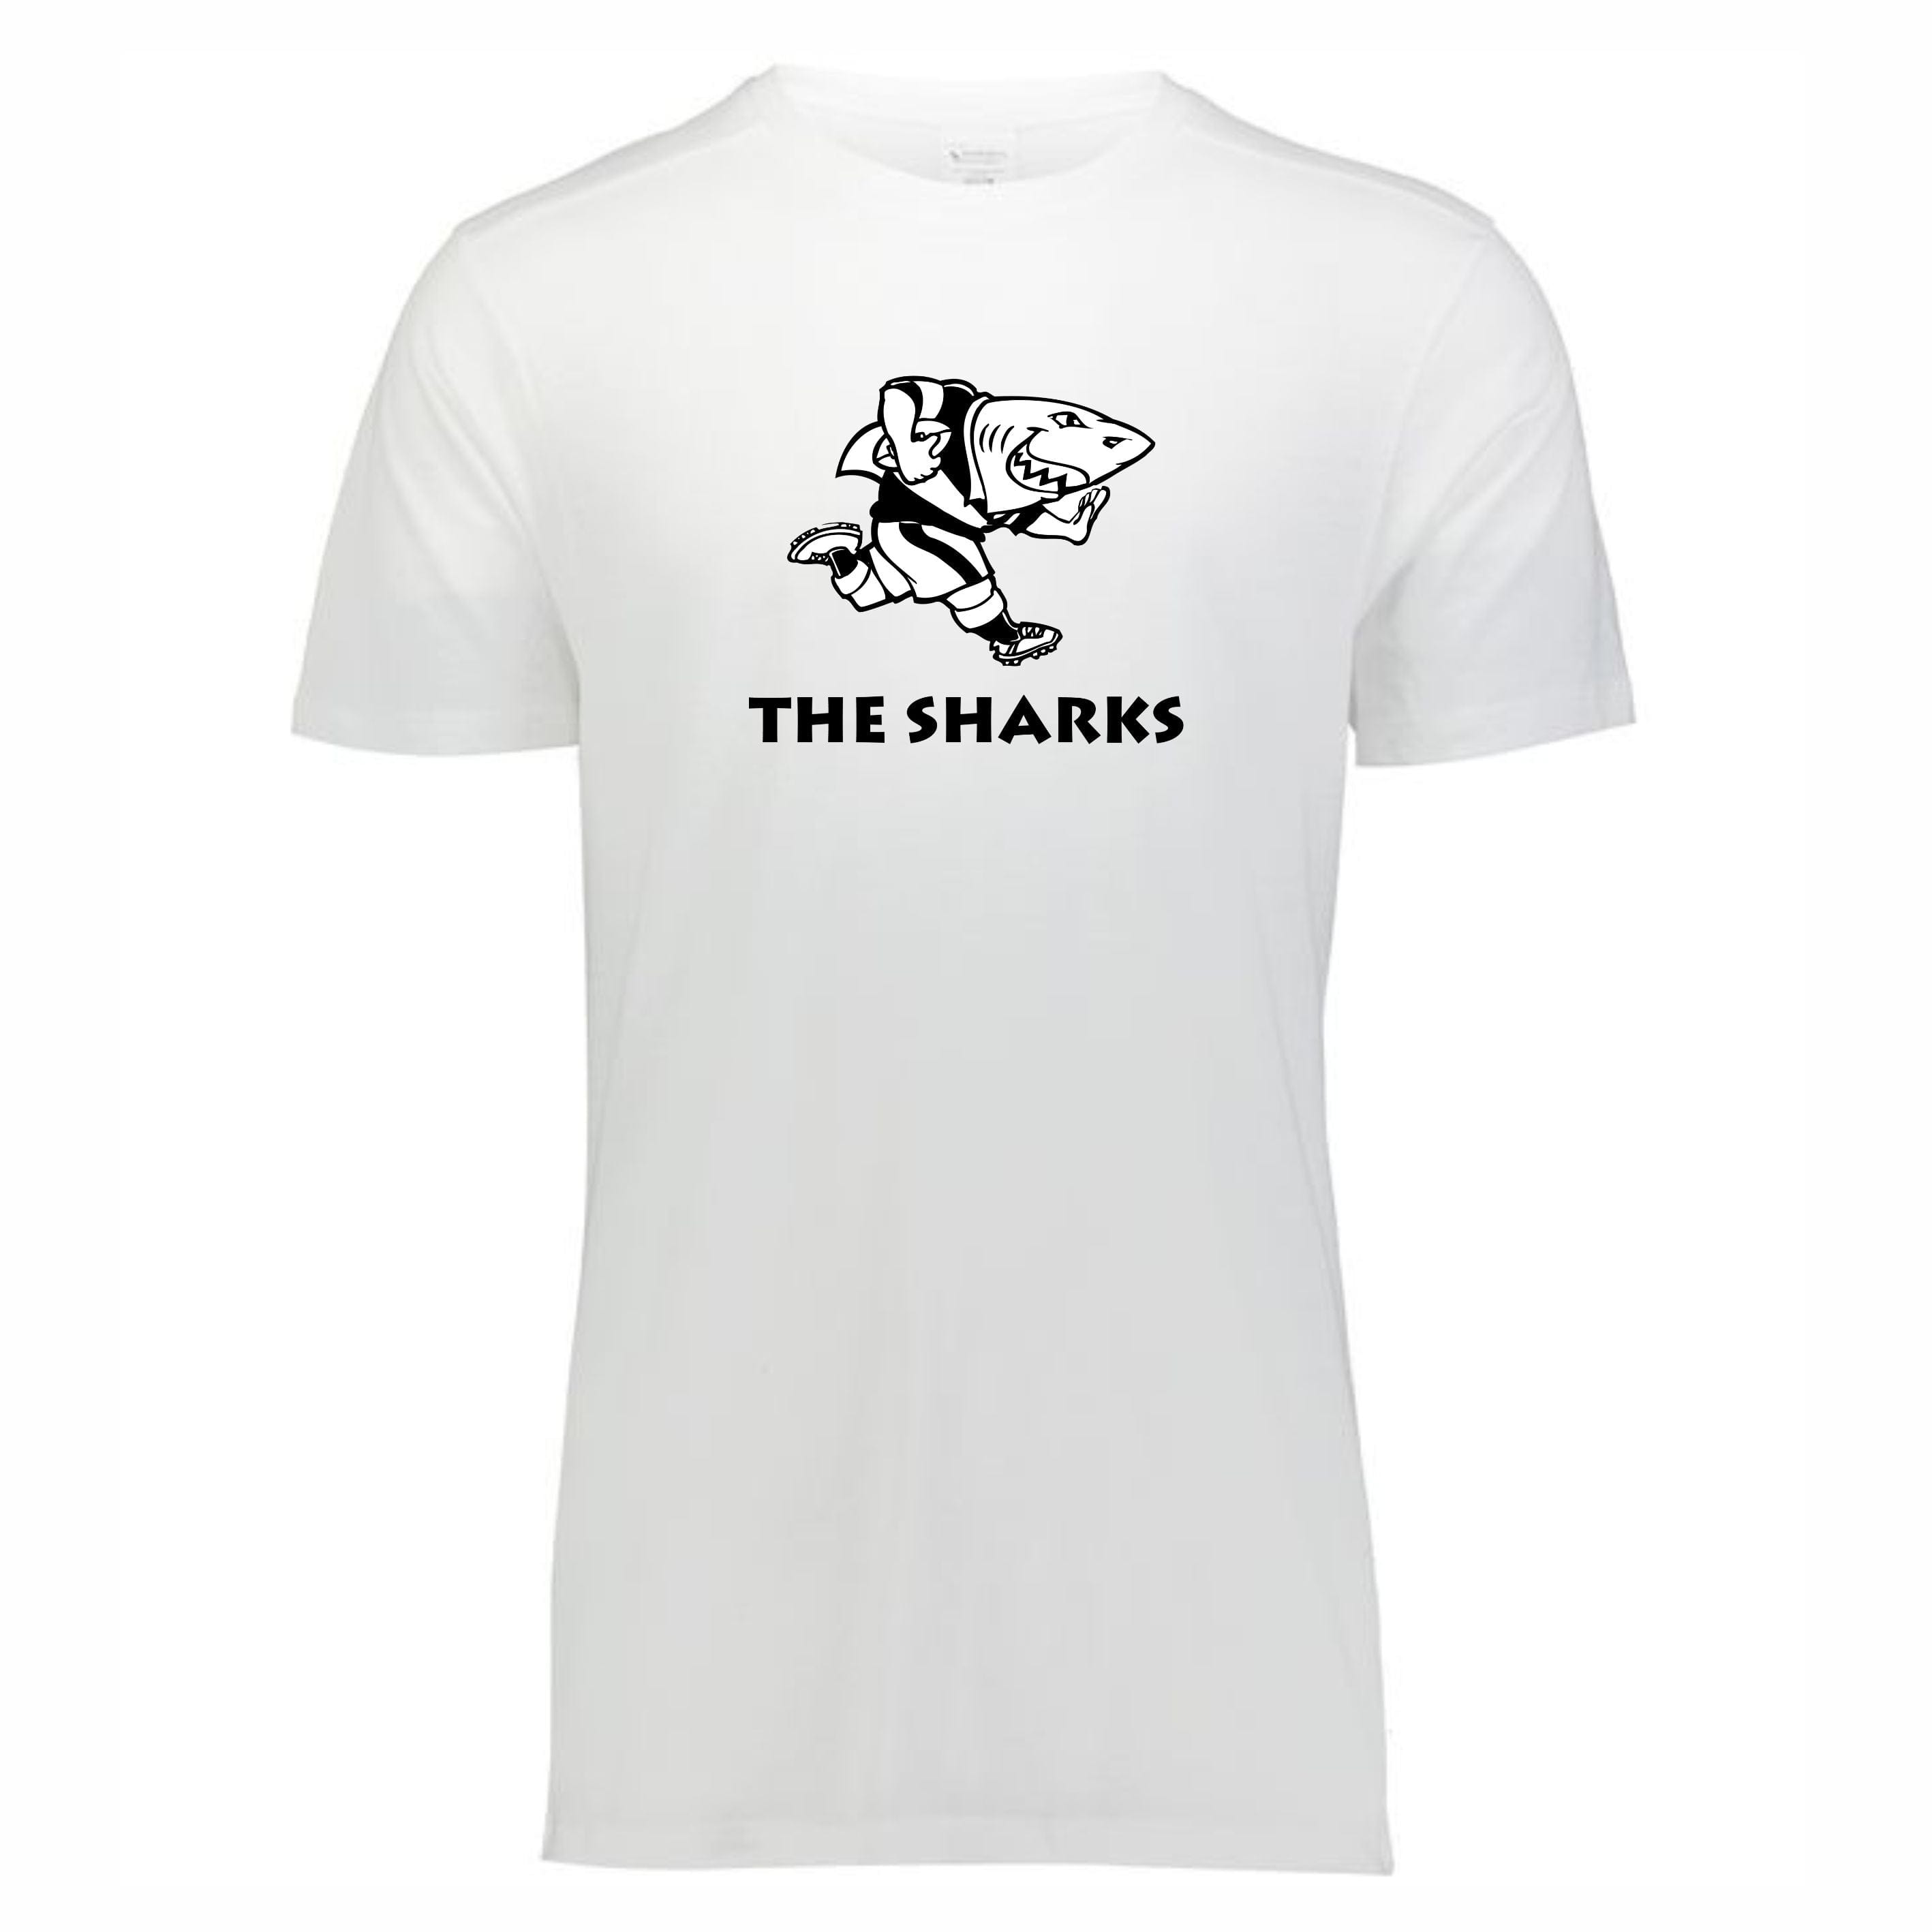 Sharks South Africa Super 12 Canterbury of New Zealand Rugby Jersey Shirt II